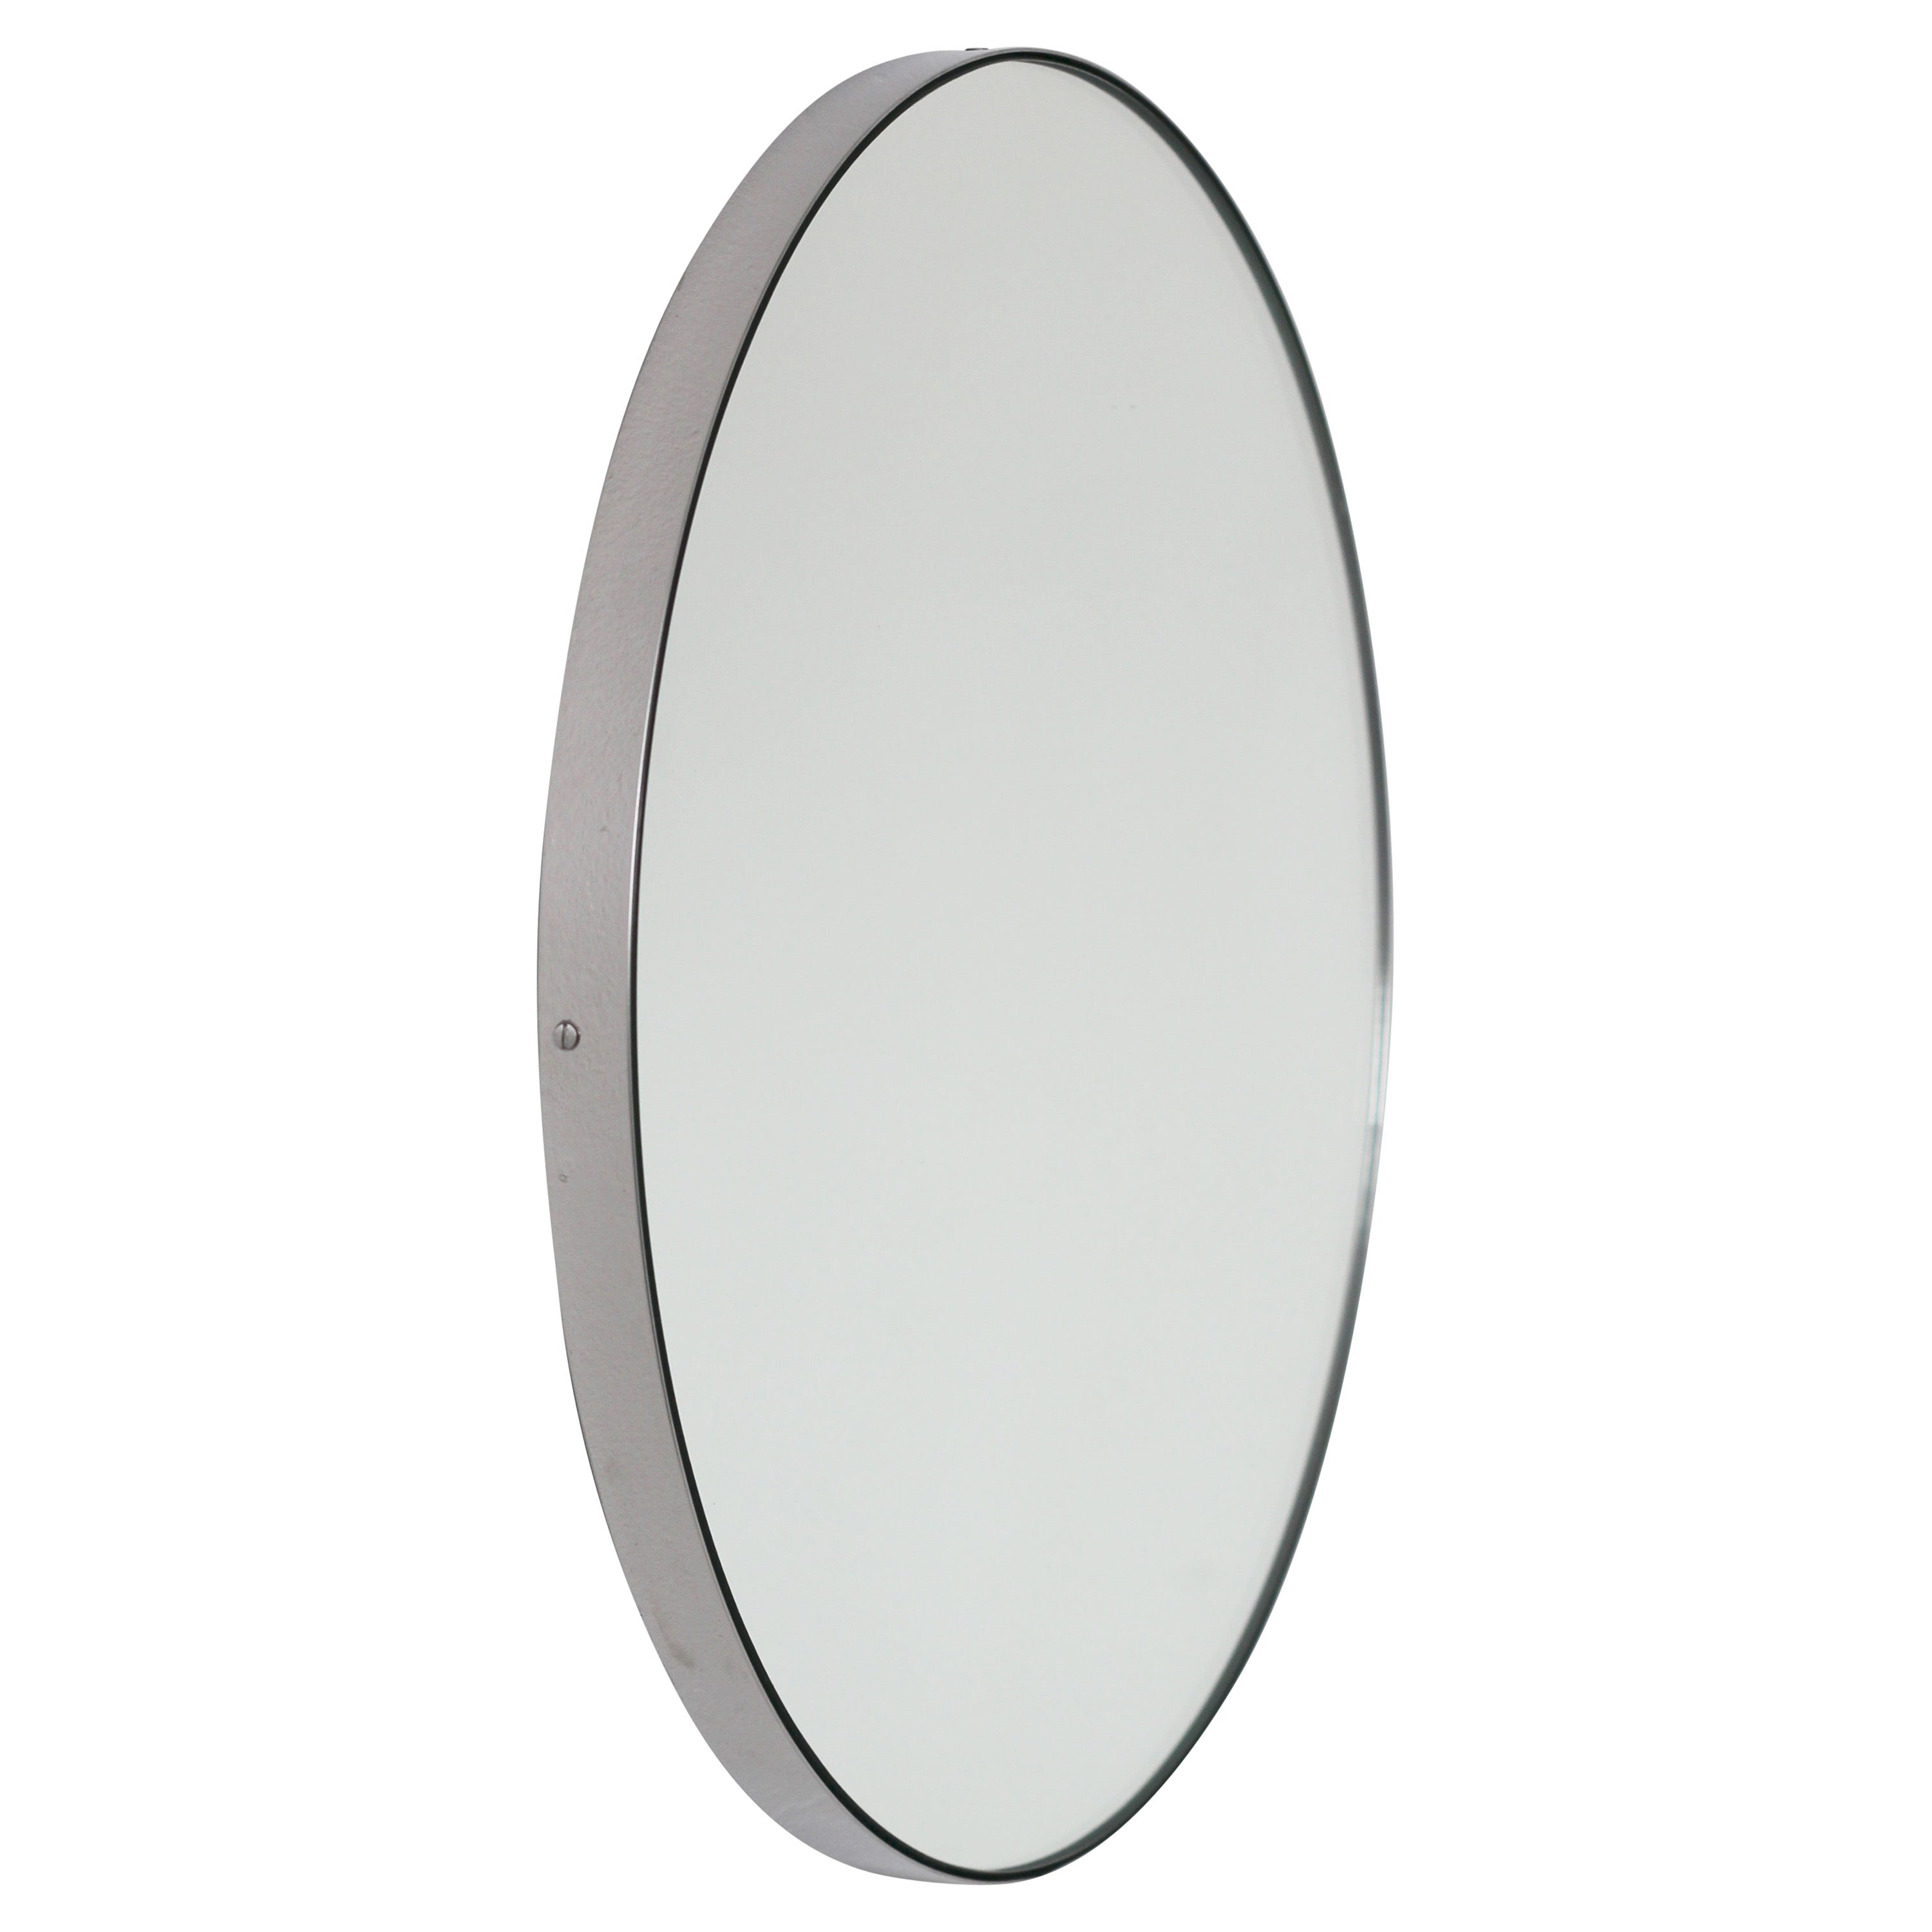 Orbis Round Modern Mirror with Stainless Steel Frame, Small For Sale